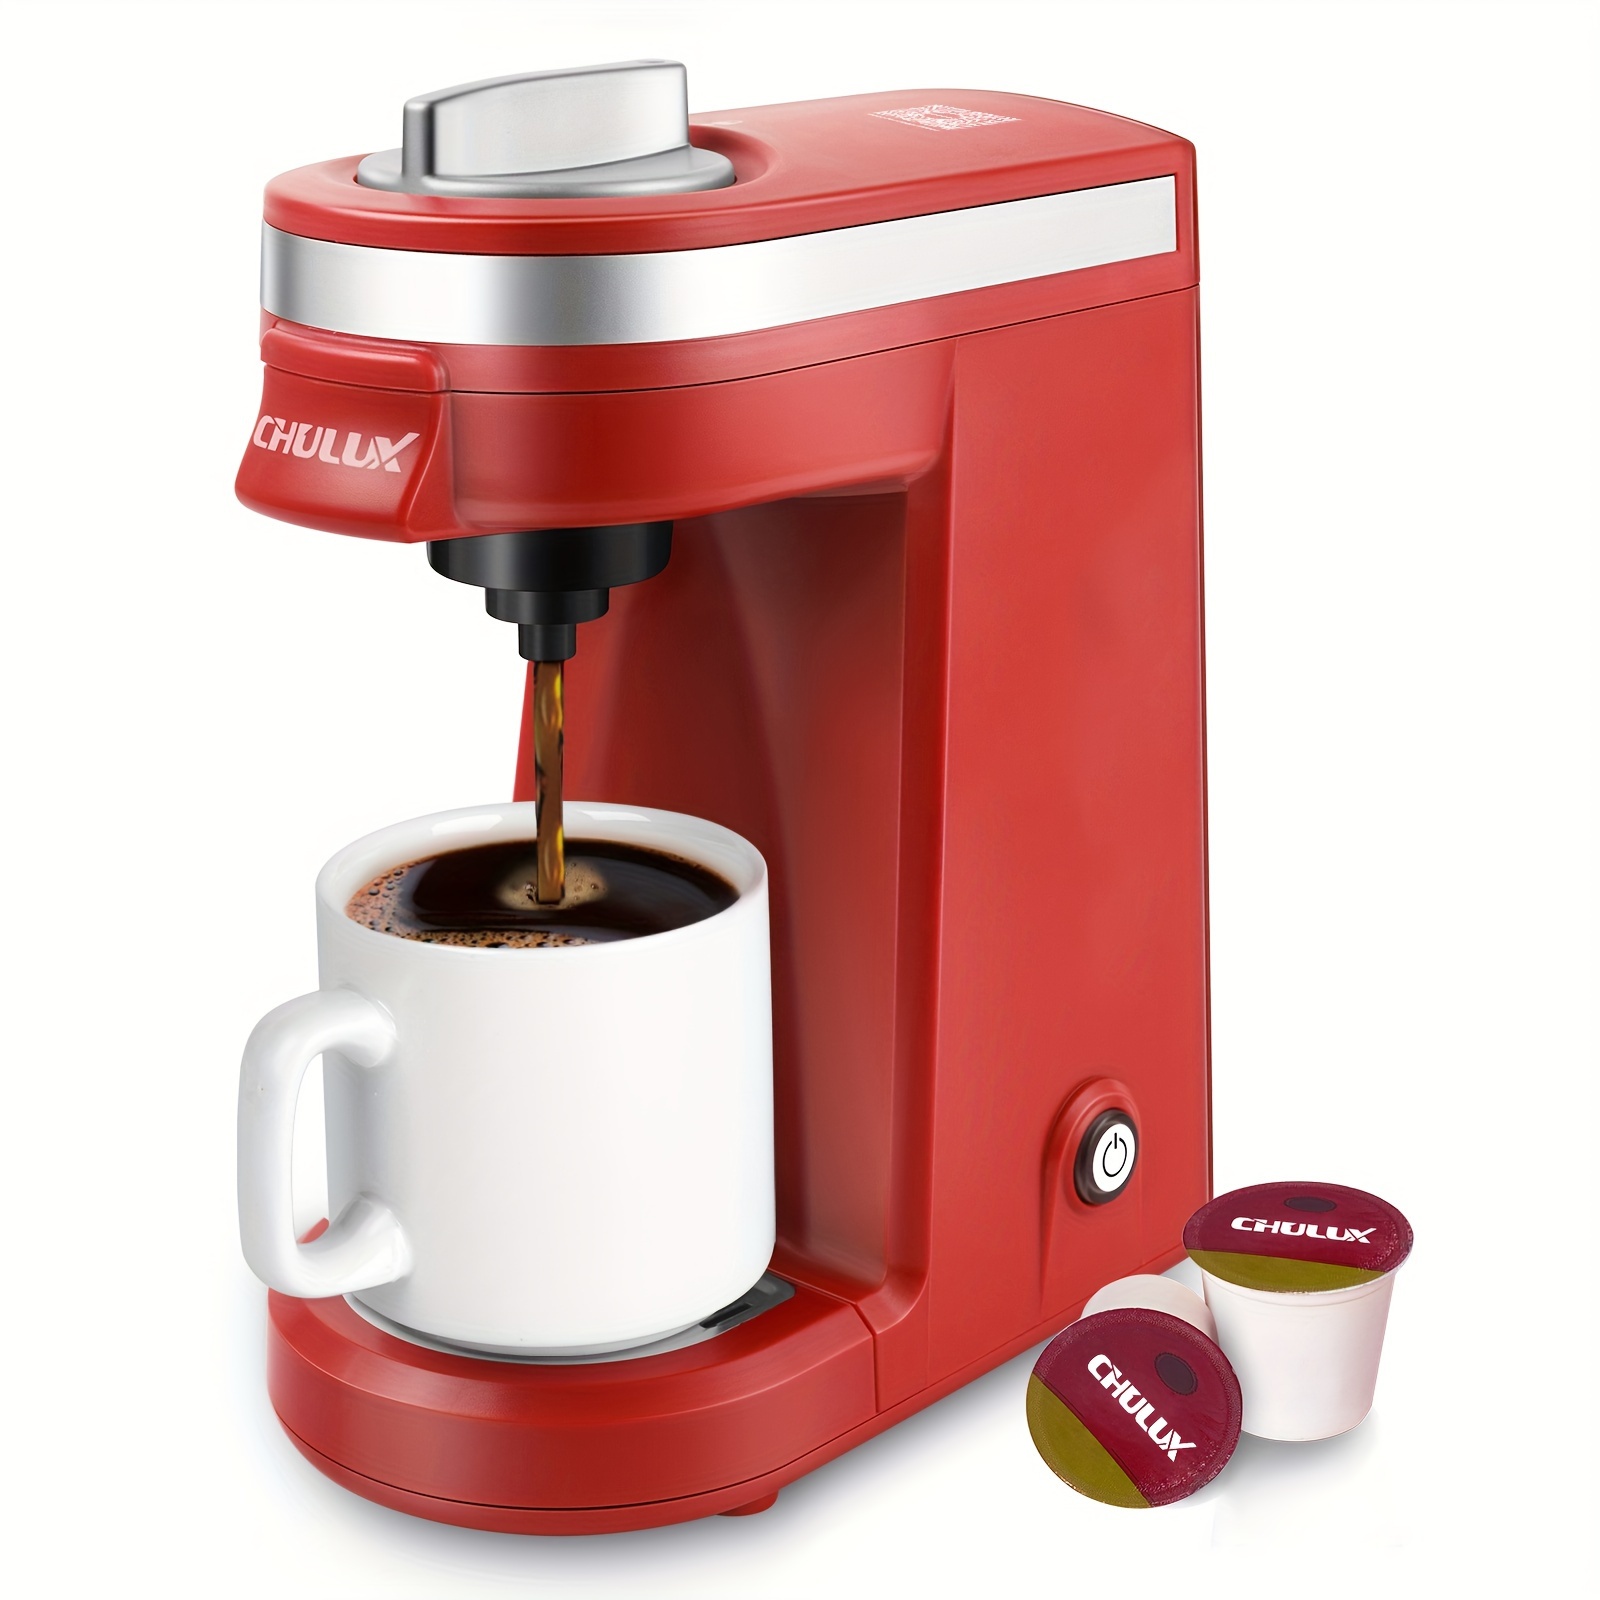 

1pc, Chulux Single Cup Coffee Maker, Suitable For K-cup Coffee Capsules, Tea Capsules And Ground Coffee, 12 Ounce Built-in Water Tank, Red